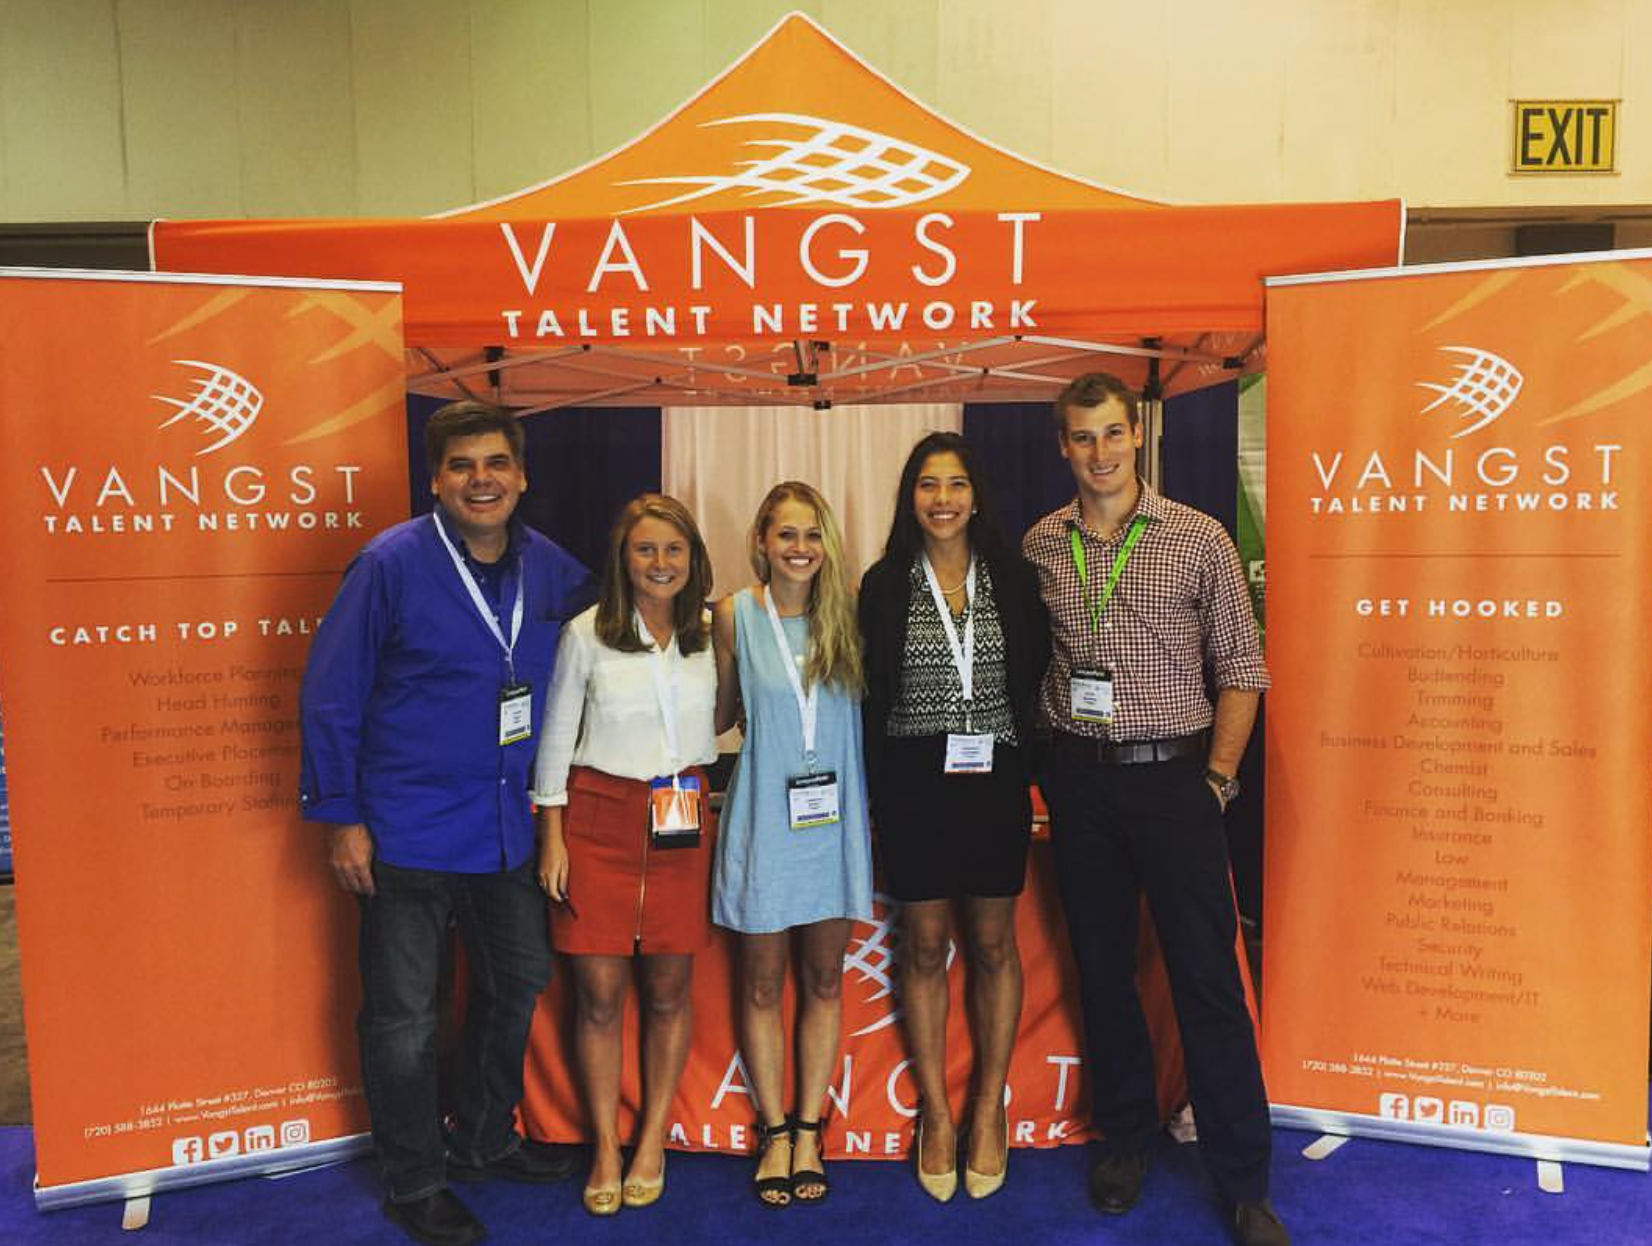 Karson Humiston (second from left) with four Vangst recruiters